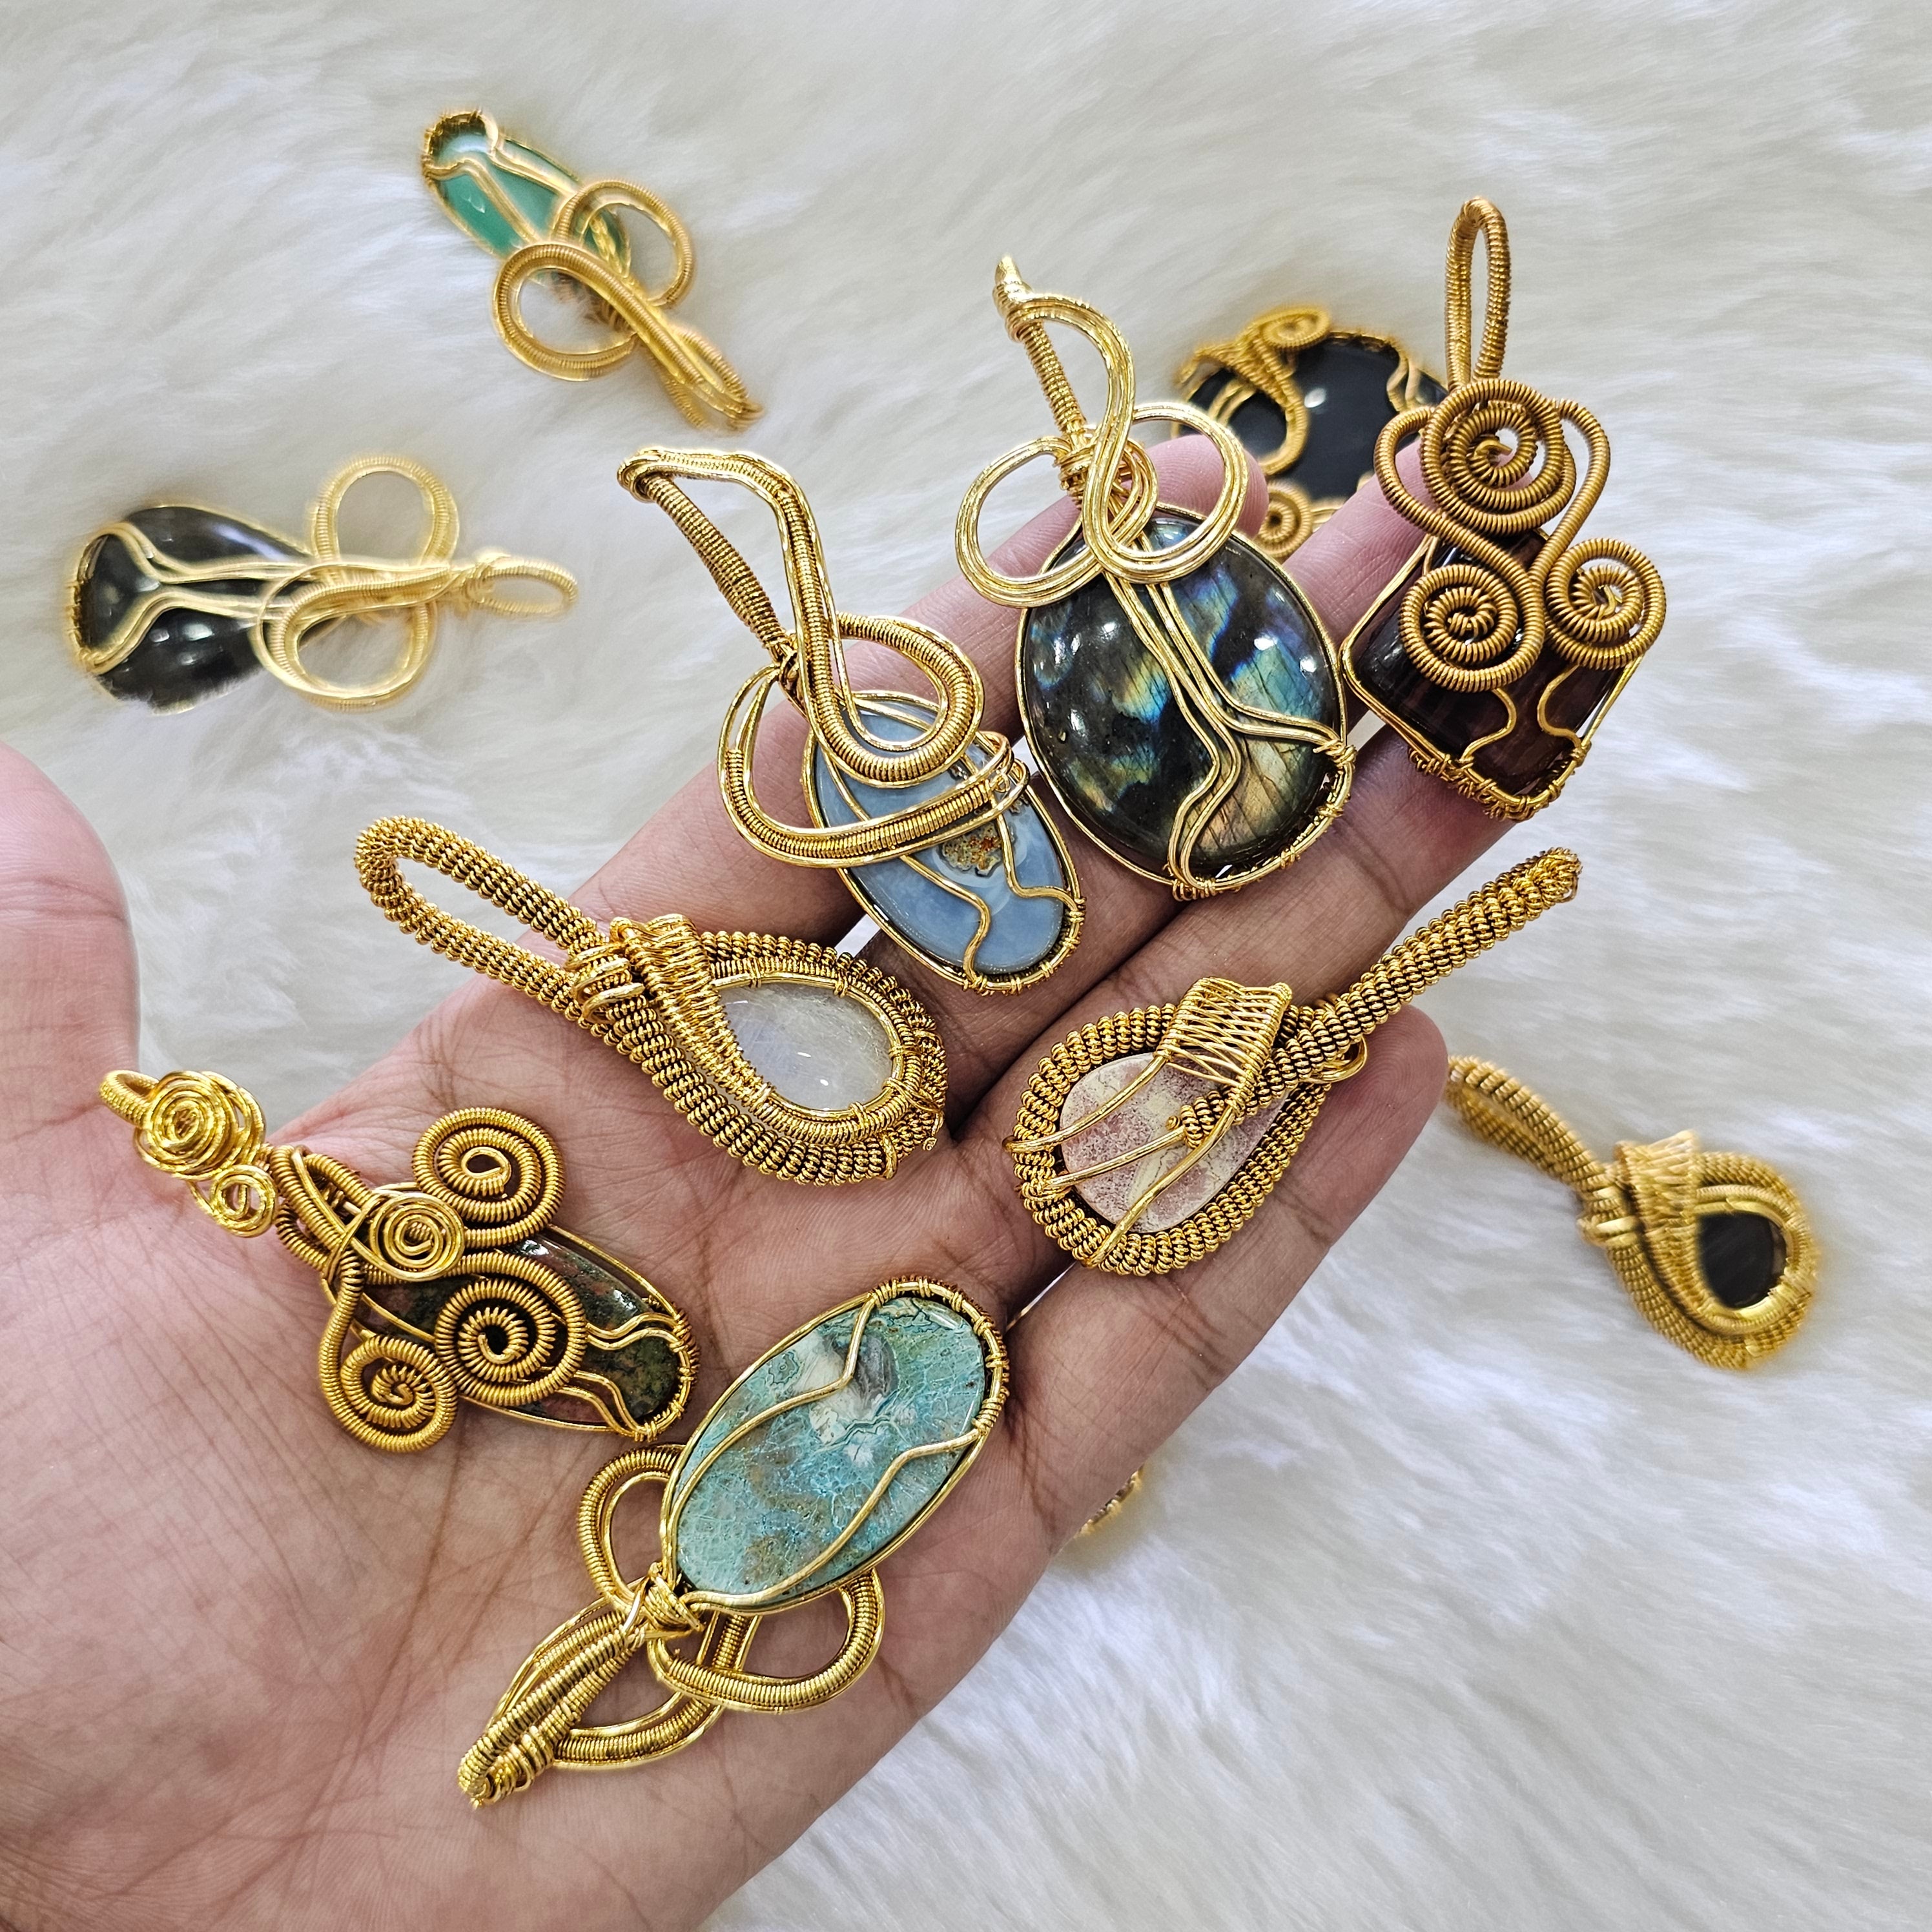 20 Pcs of Gold Plated Wire wrapped Pendant | 3 Inches - The LabradoriteKing